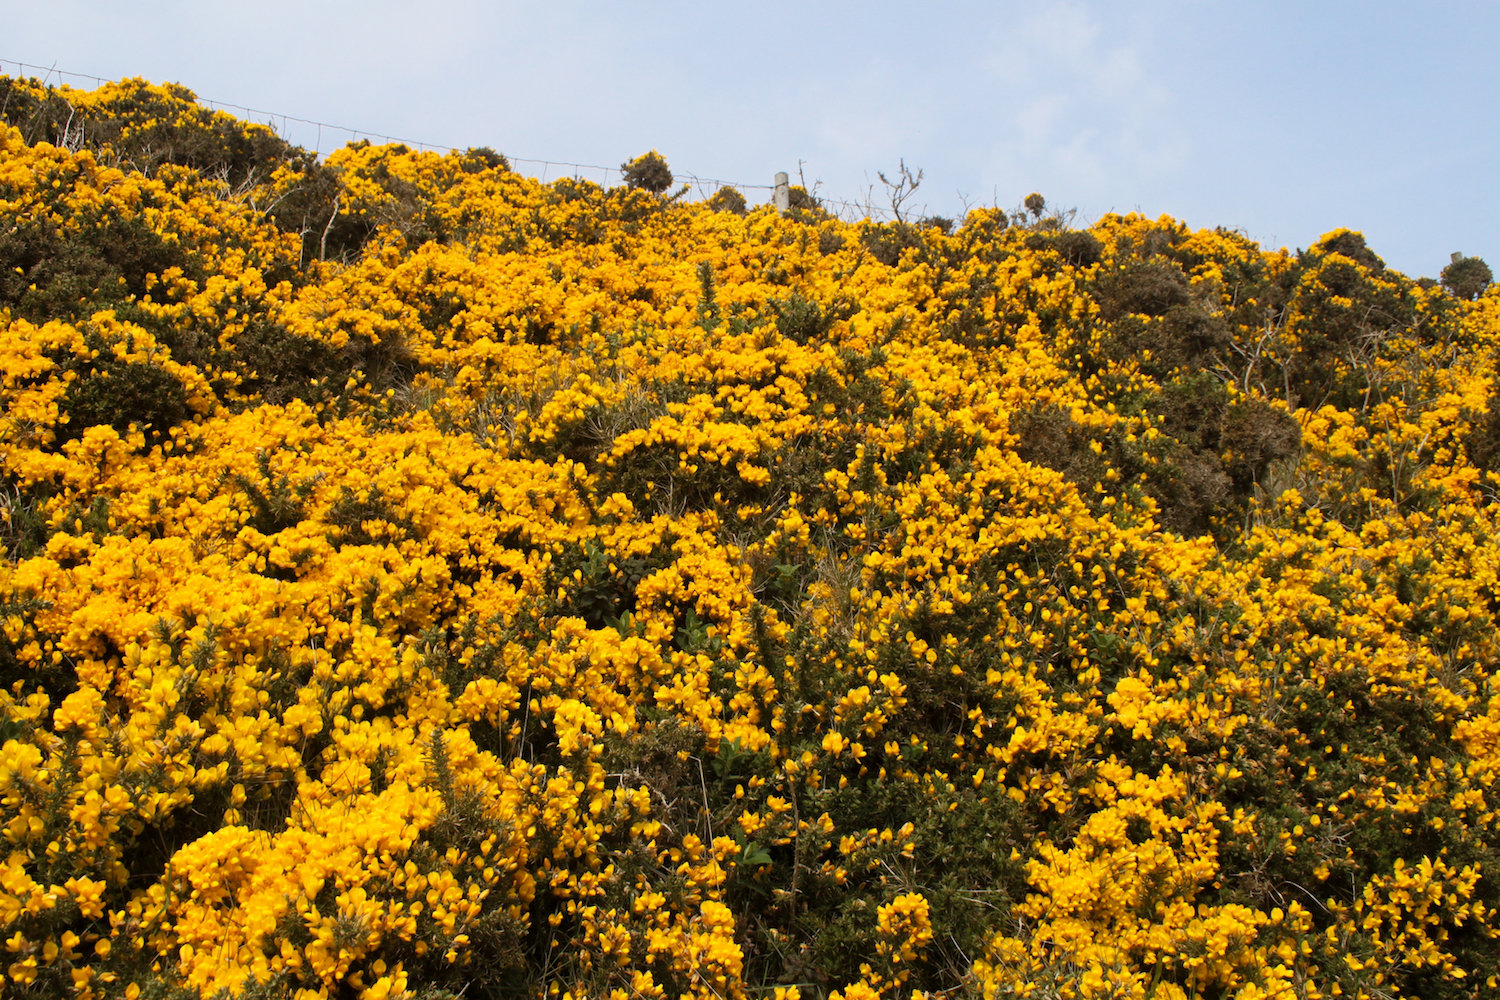 Field of yellow flowers, Howth (Eat Me. Drink Me.)